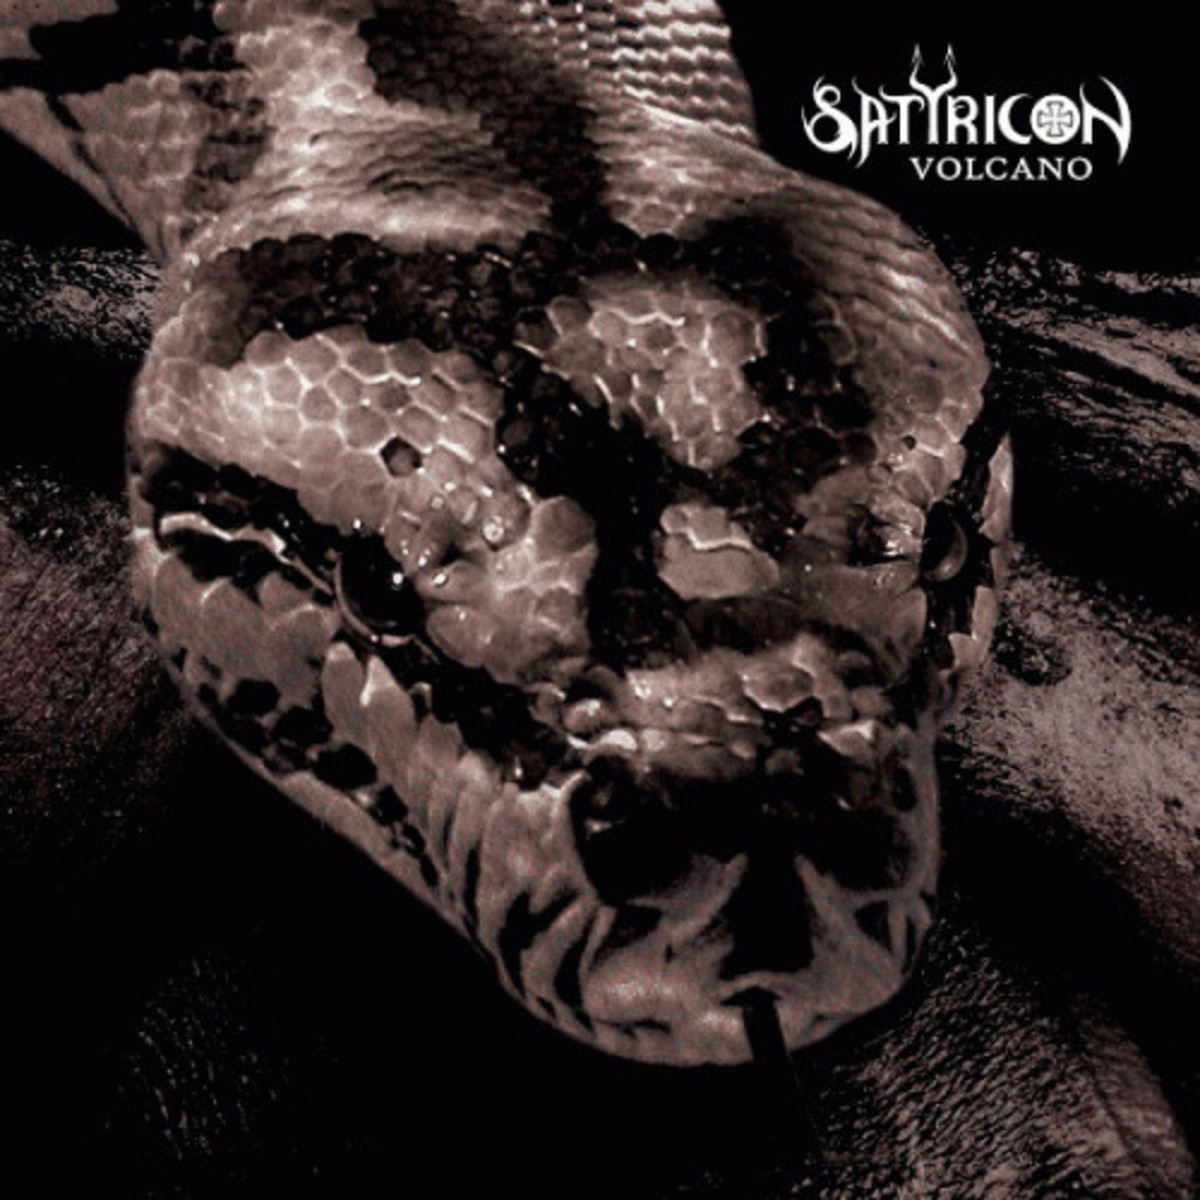 review-of-the-album-volcano-by-norwegian-black-metal-band-satyricon